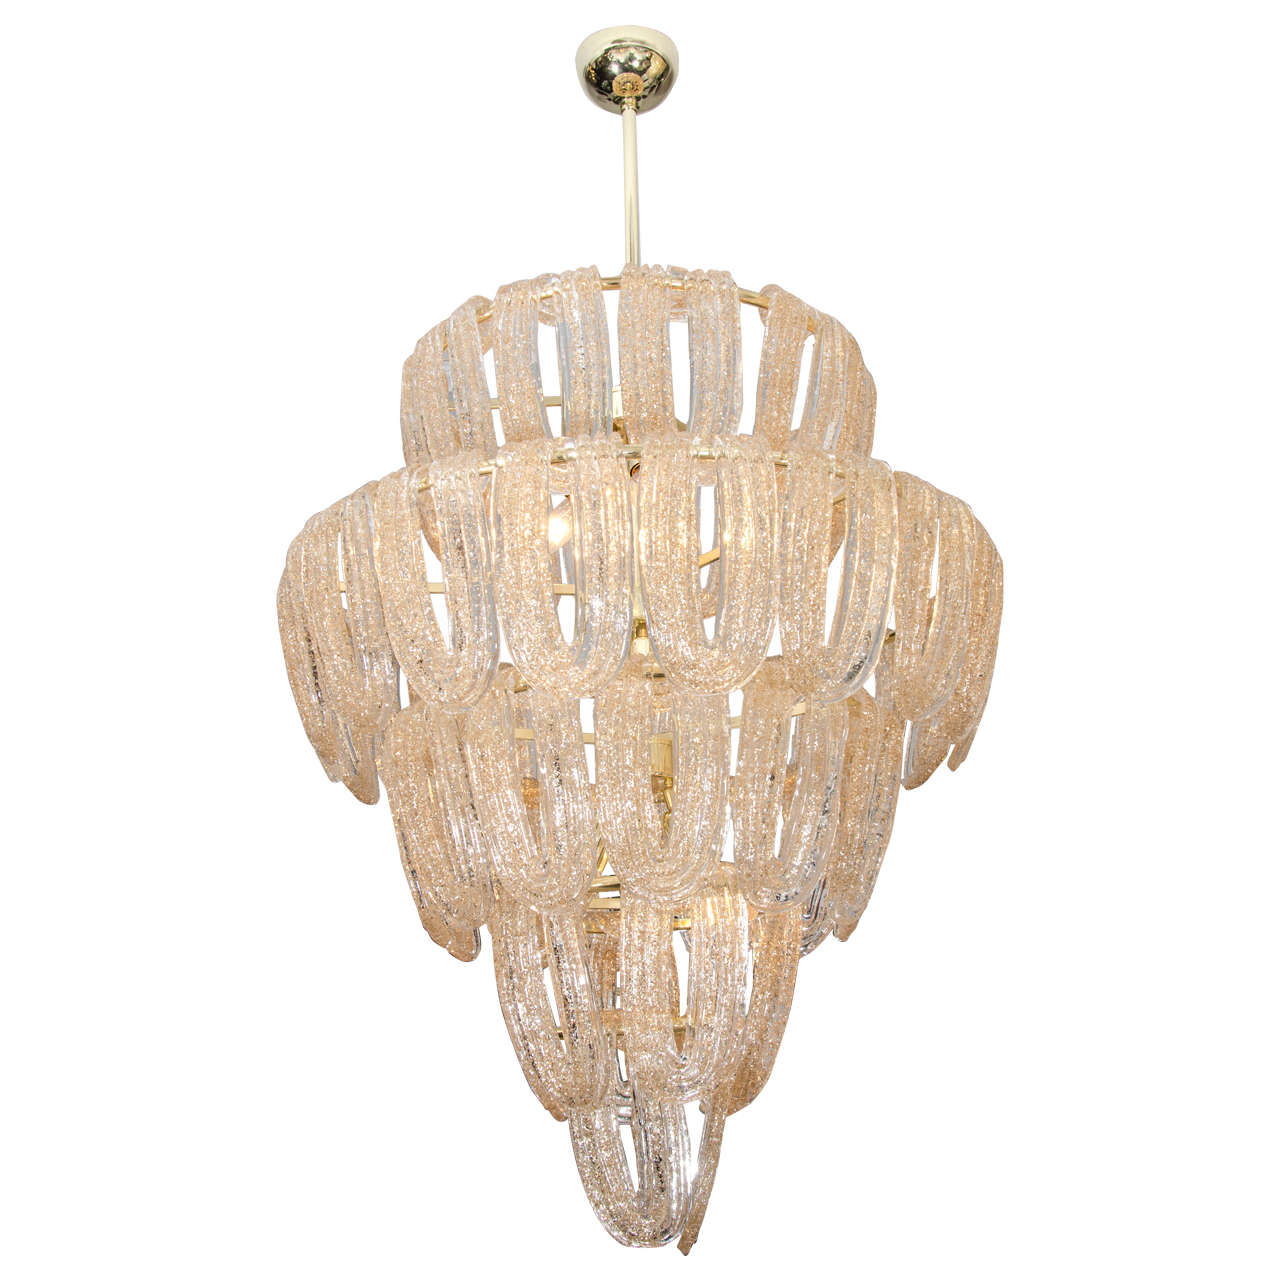 Large Mazzega Chandelier with Gold Leaf Murano Glass